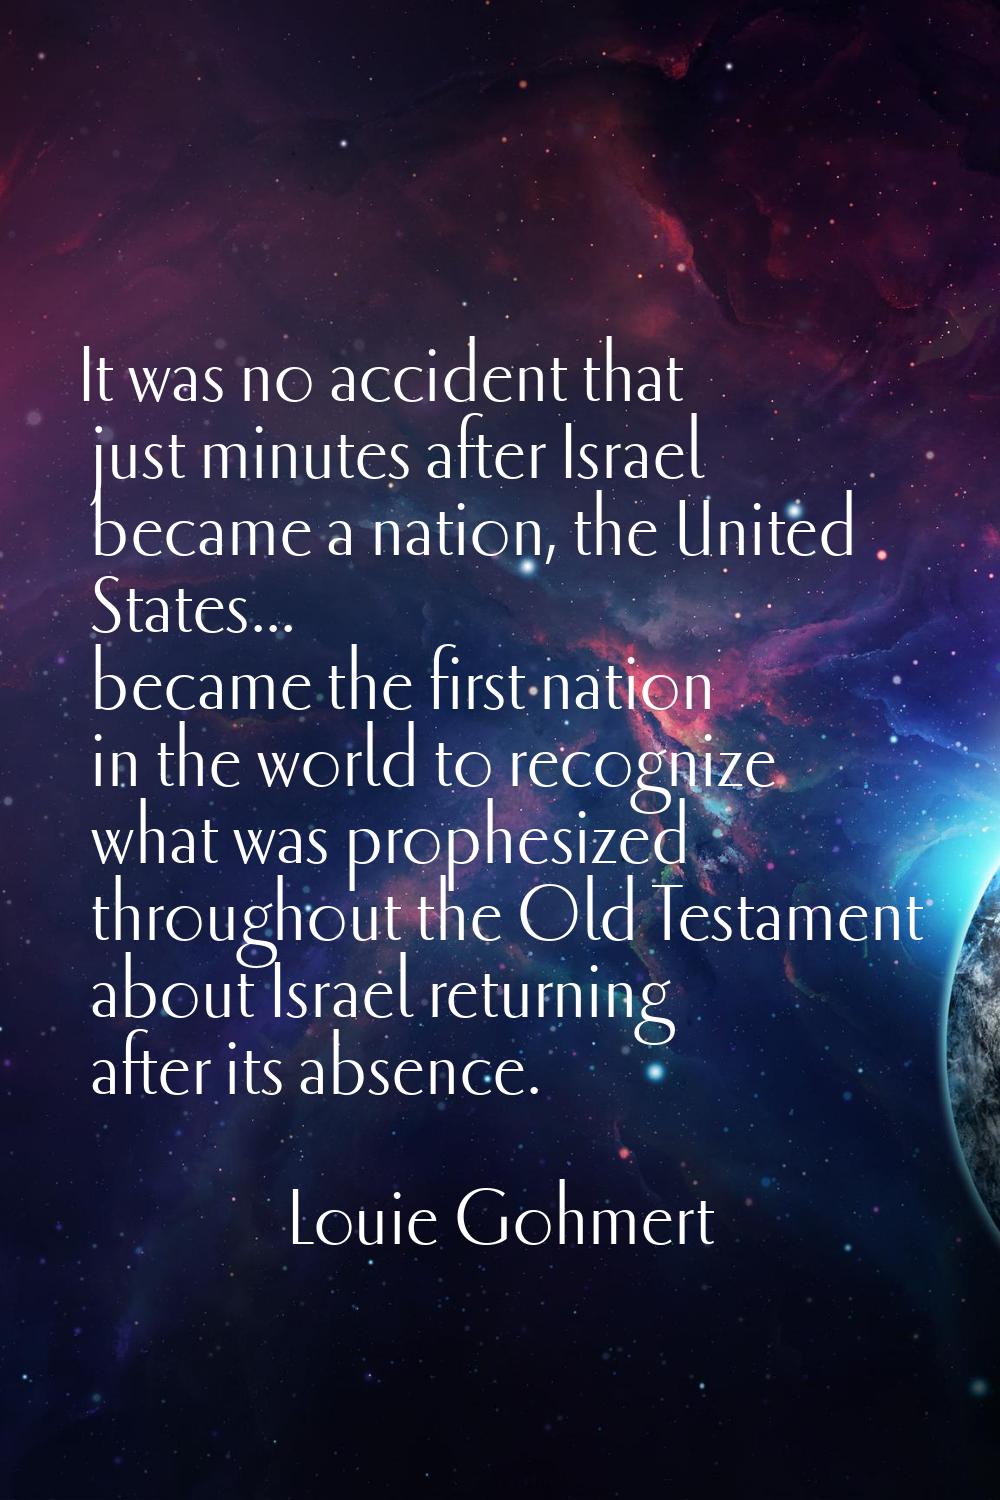 It was no accident that just minutes after Israel became a nation, the United States... became the 